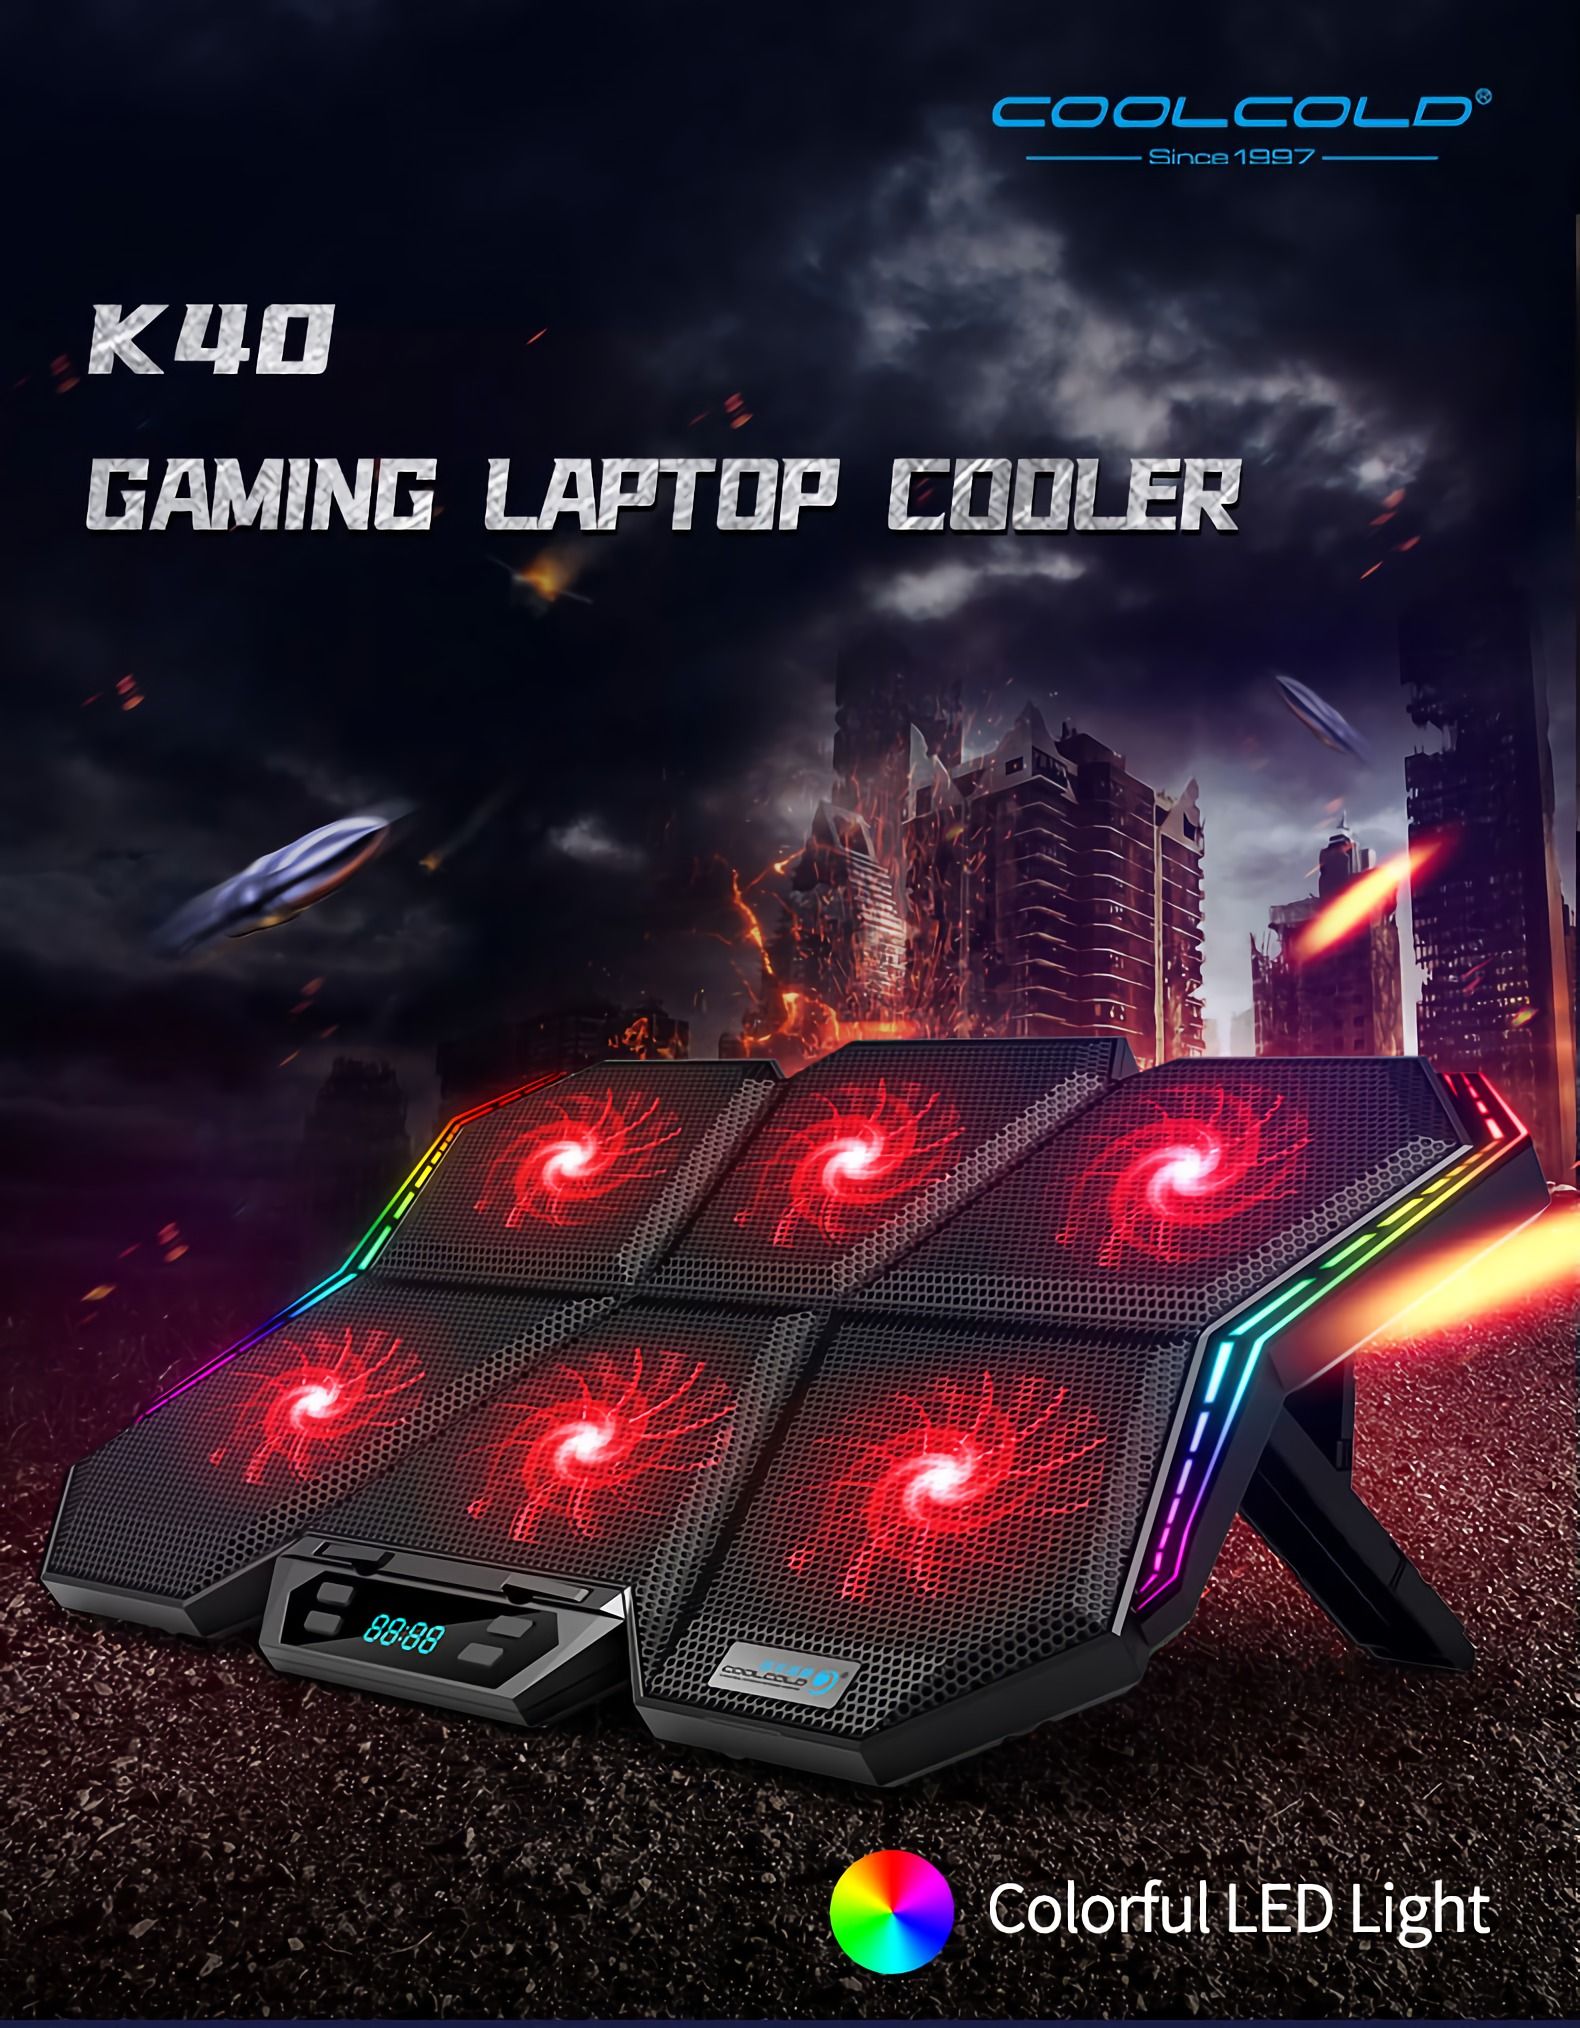 Coolcold-Laptop-Cooling-Pads-Gaming-RGB-Laptop-Cooler-For-12-17-inch-Led-Screen-Notebook-Cooler-Stan-1733725